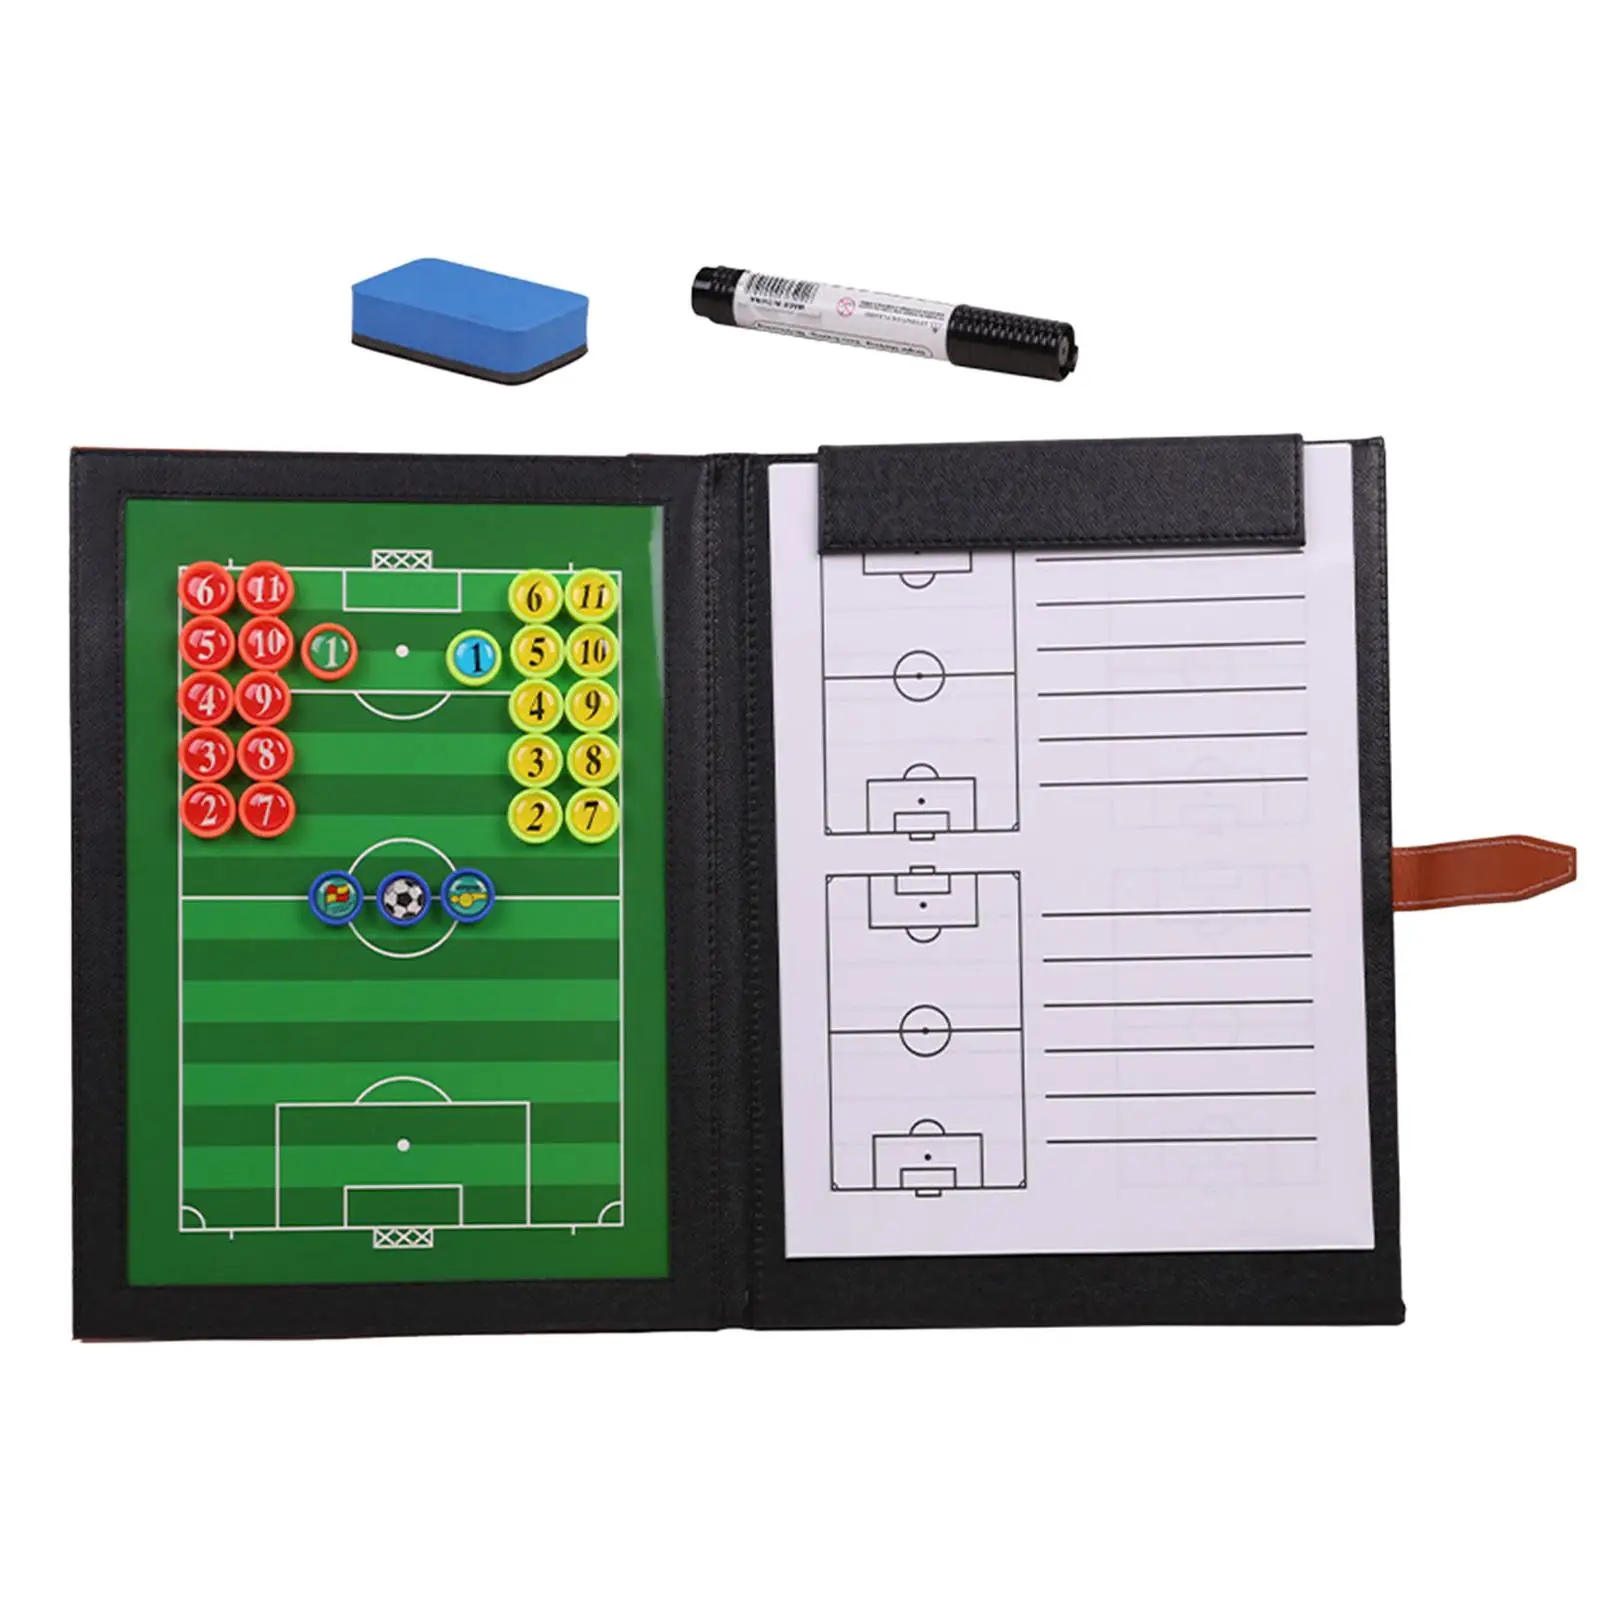 Portable Football Coaches Board with Marker Pen Guidance Training Assistant Large Soccer Coaching Clipboard for Strategizing